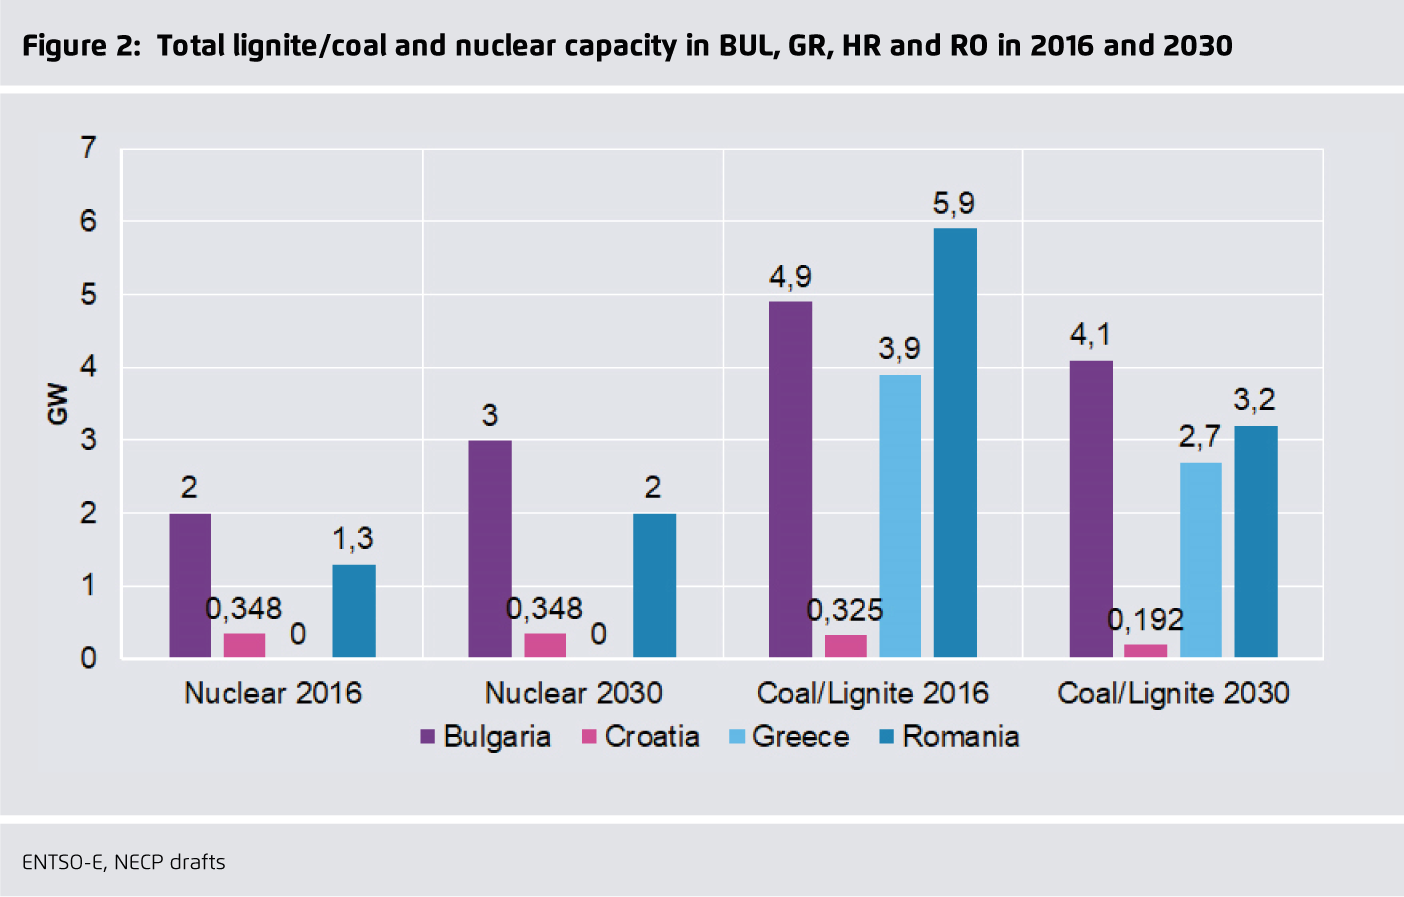 Preview for Total lignite/coal and nuclear capacity in BUL, GR, HR and RO in 2016 and 2030